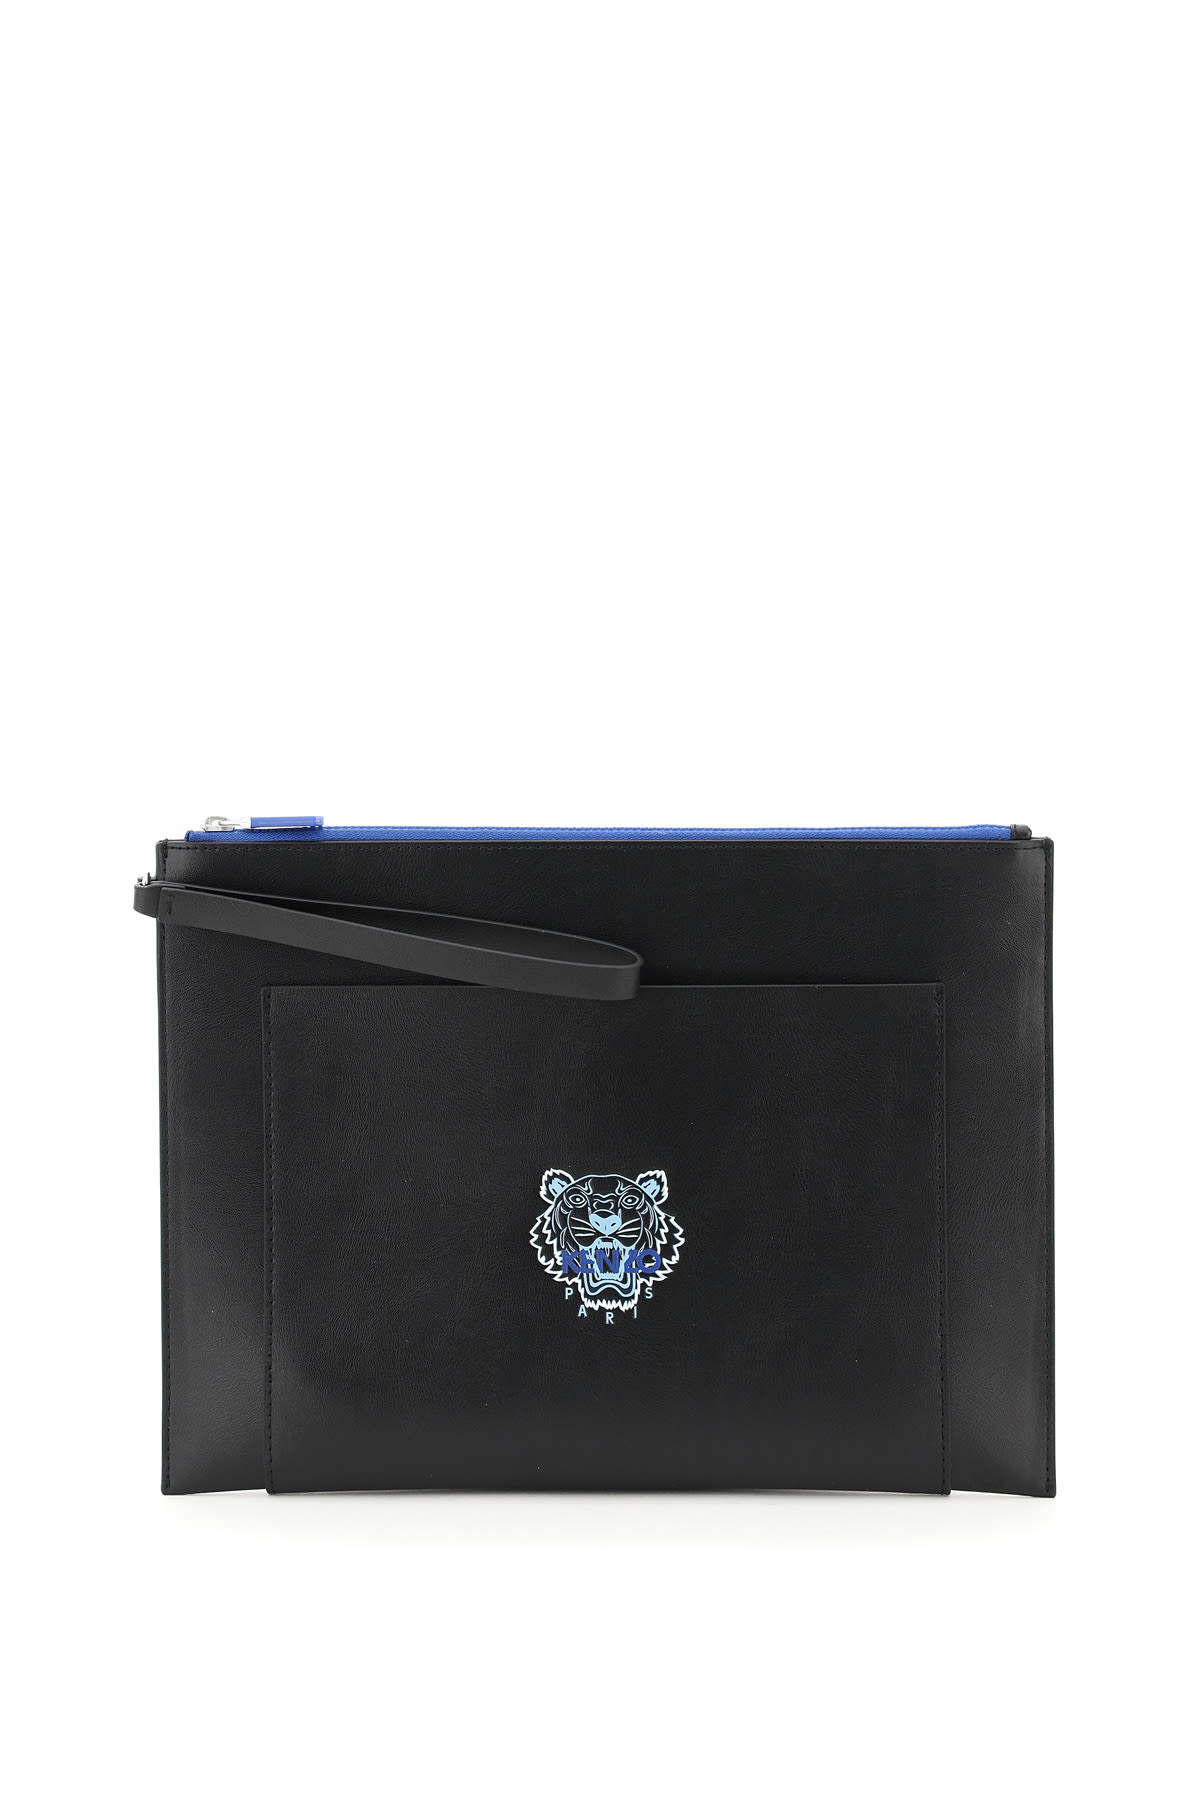 Kenzo Large Leather Pouch Tiger